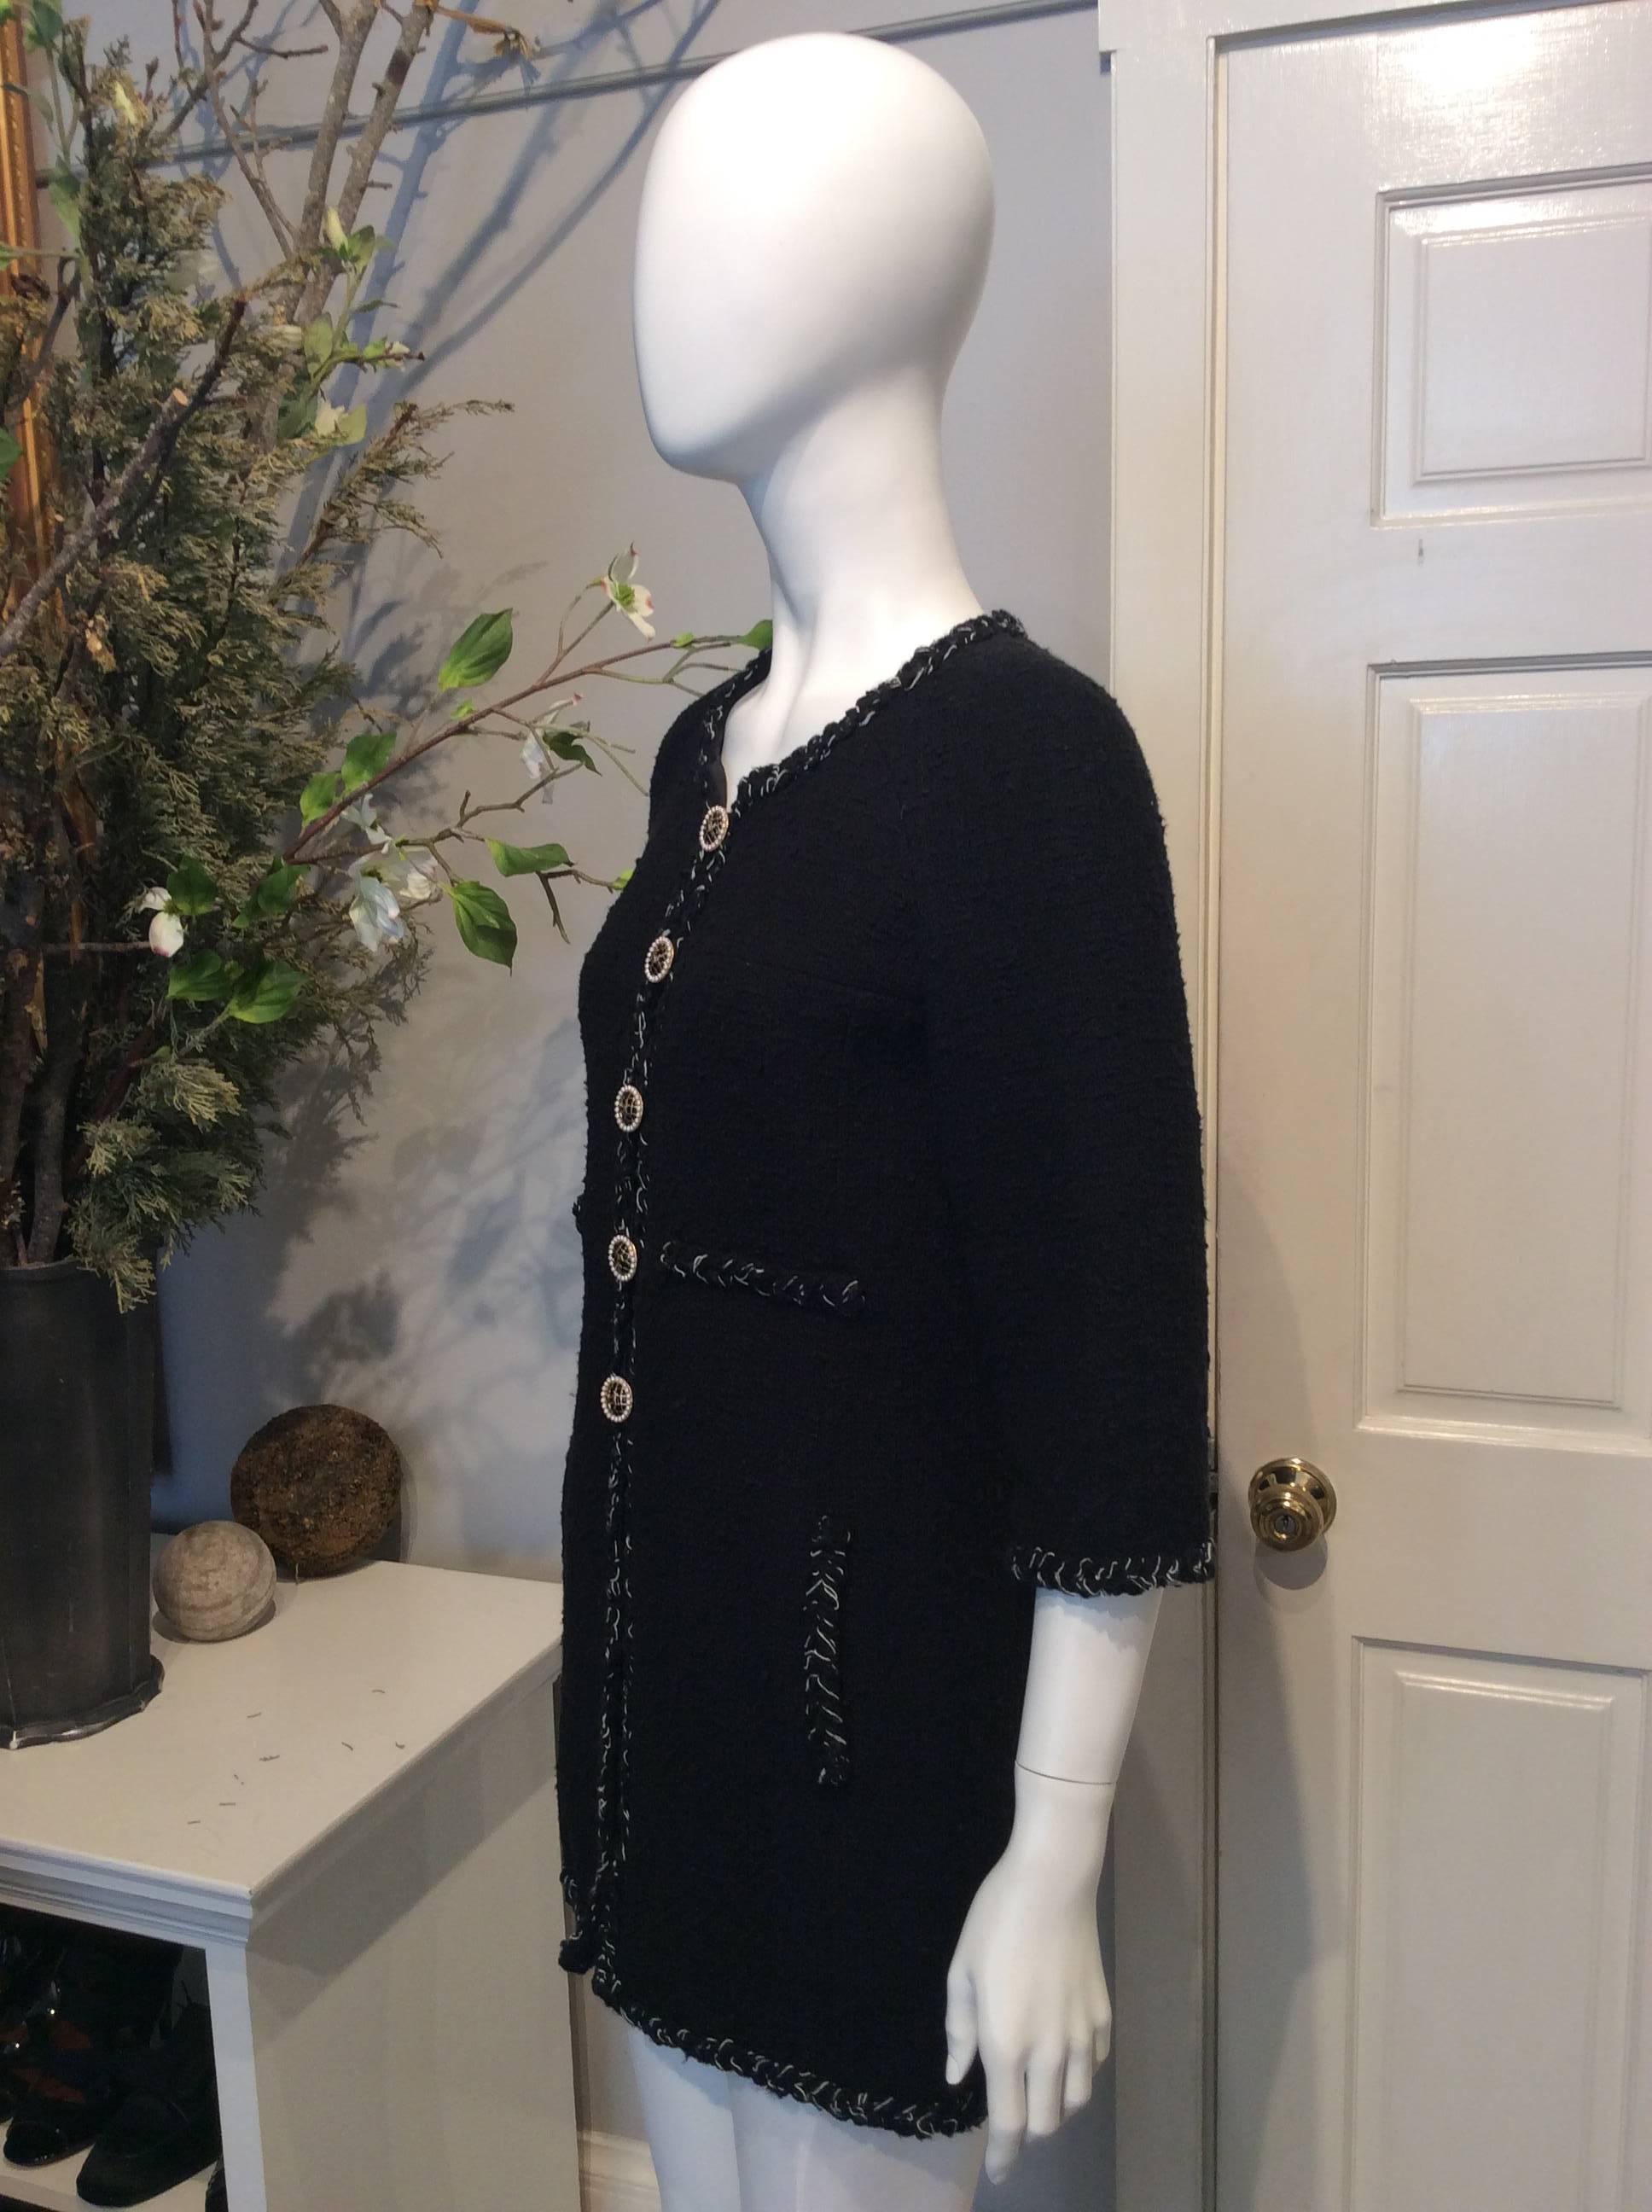 Chanel Black Tweed Coat W/ Braided Trim, Pearl and Black Enamel Buttons Sz36/Us4 In Excellent Condition For Sale In San Francisco, CA